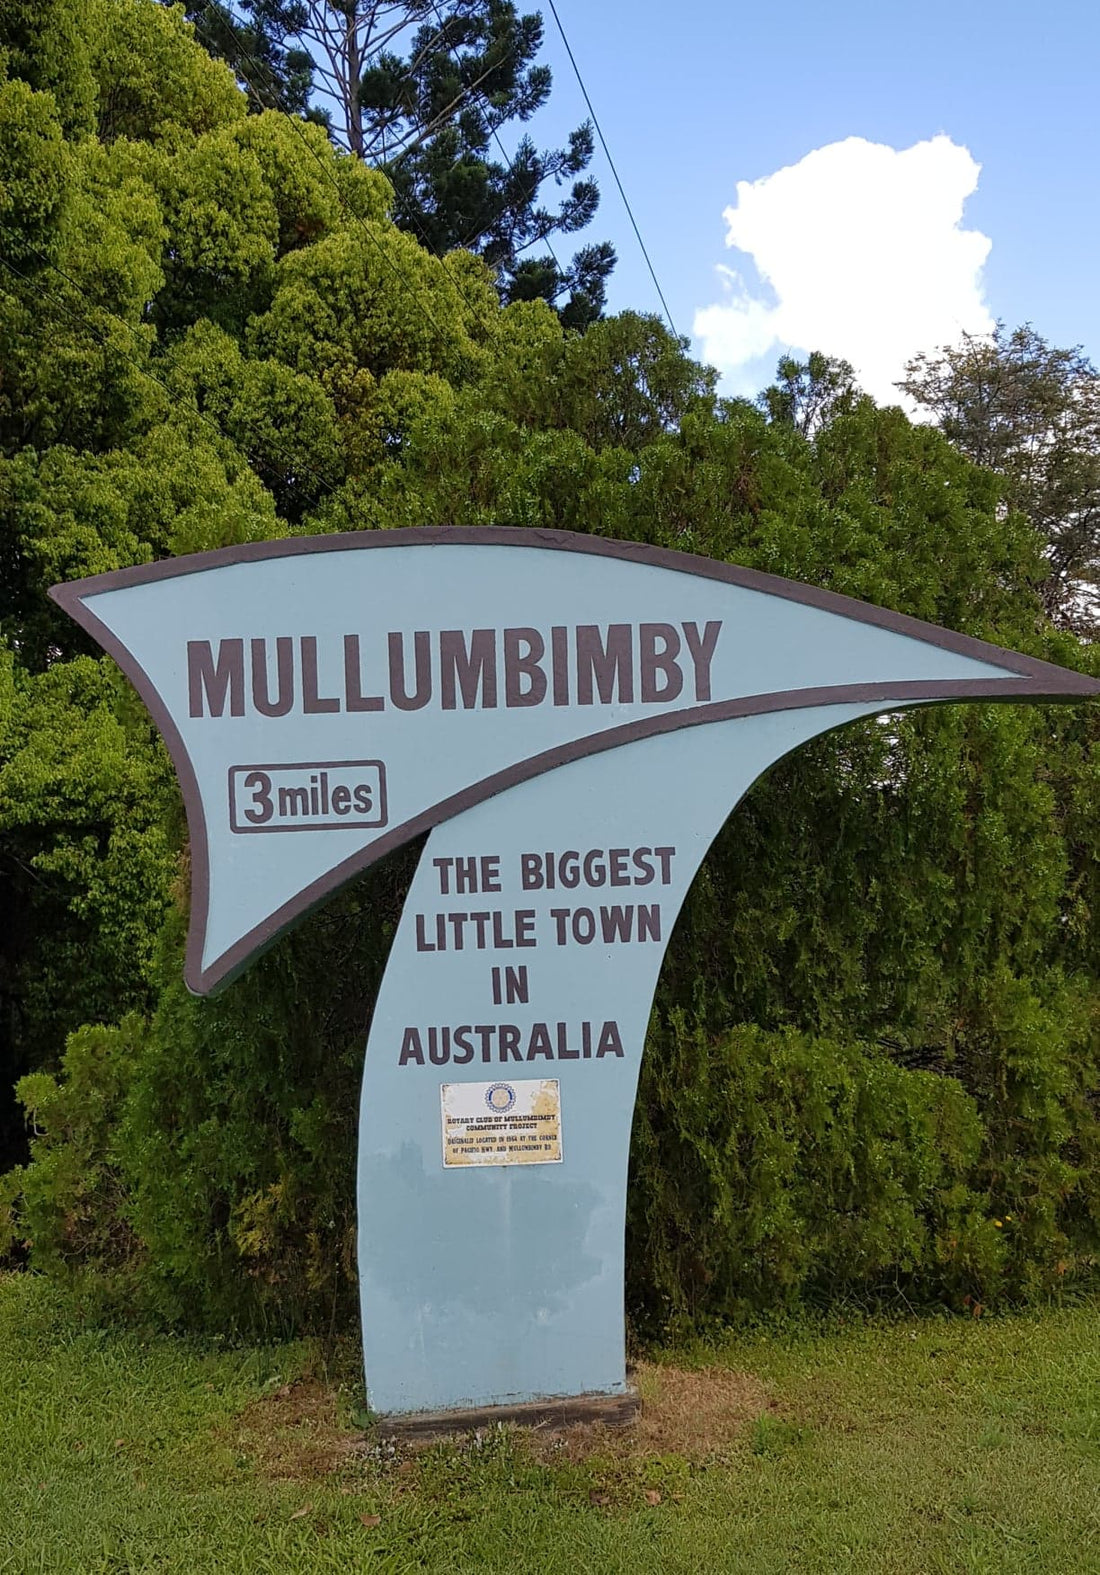 What is the link between Tuckett's Tomahawk and Mullumbimby Rotary Club?